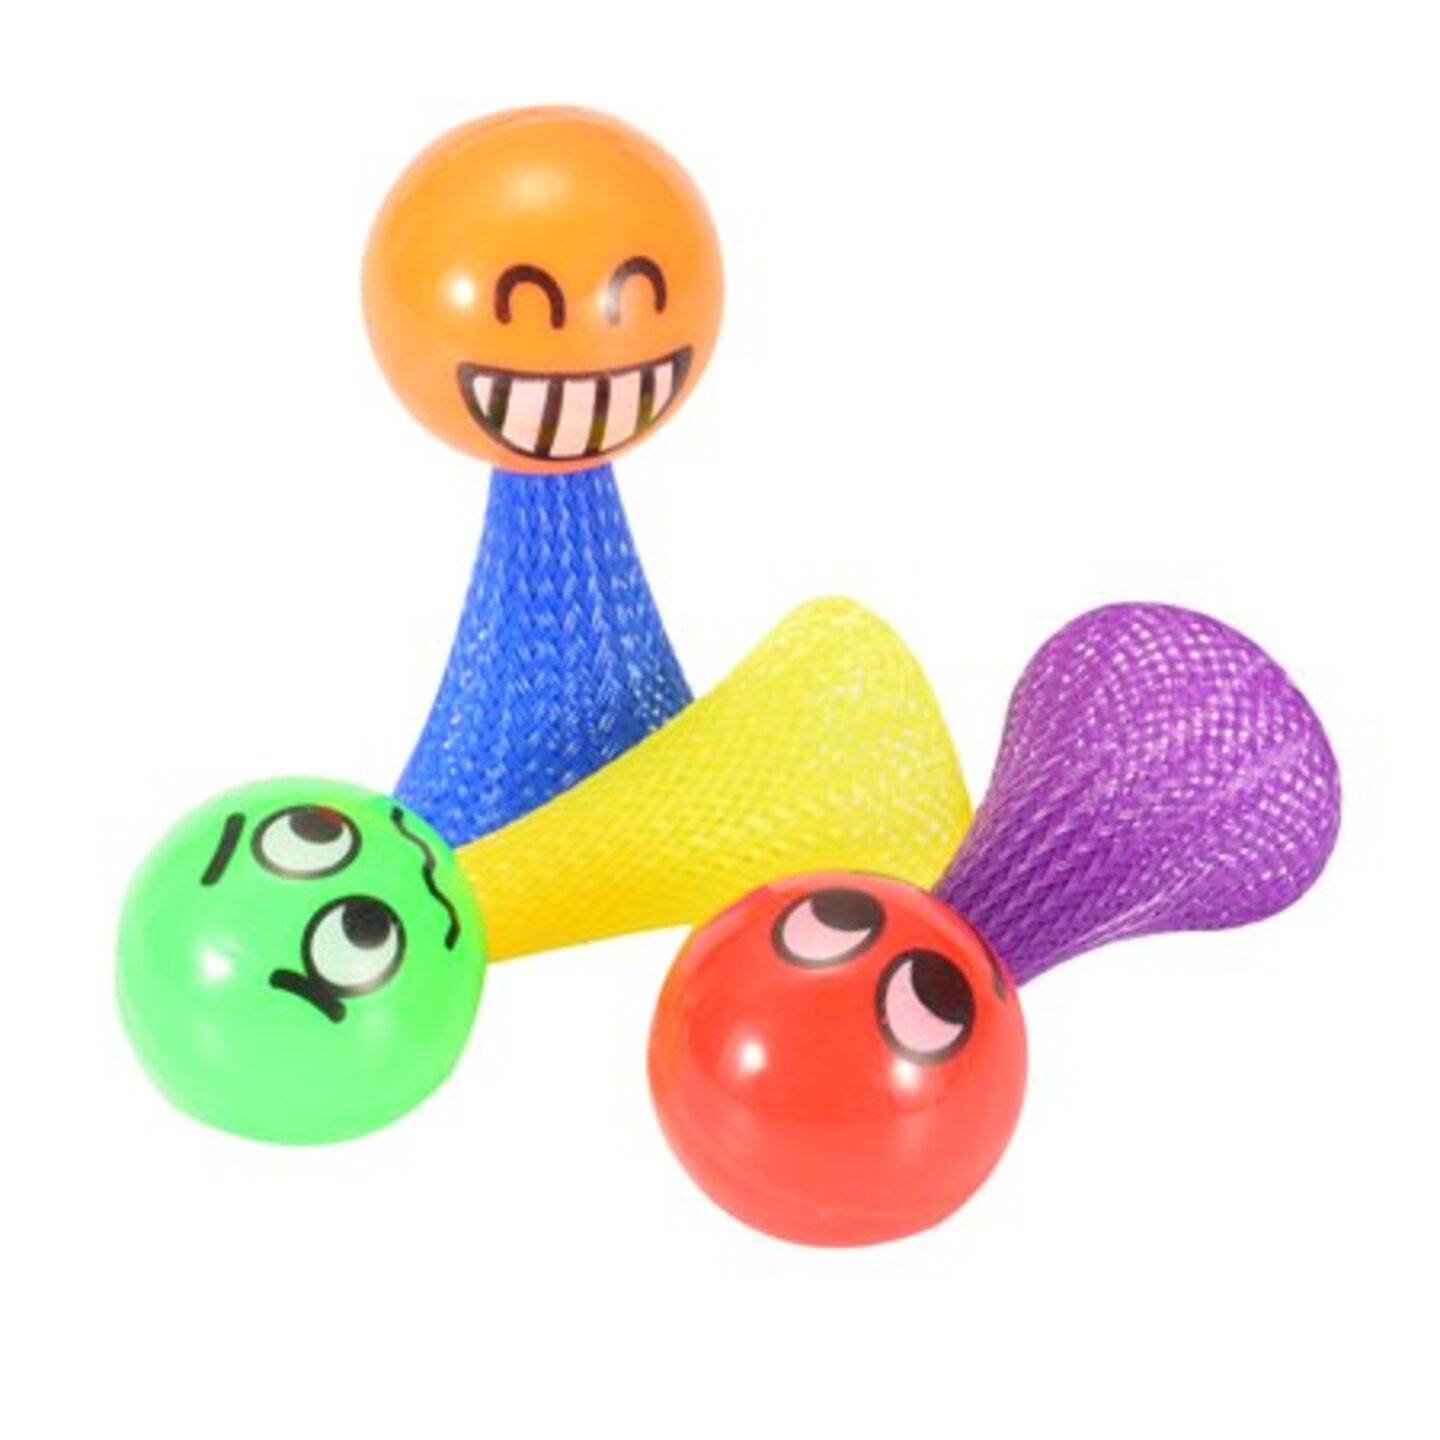 Science Educational Toy For Kids Play N Learn Party Gift Jumping Man 4 pieces per pack